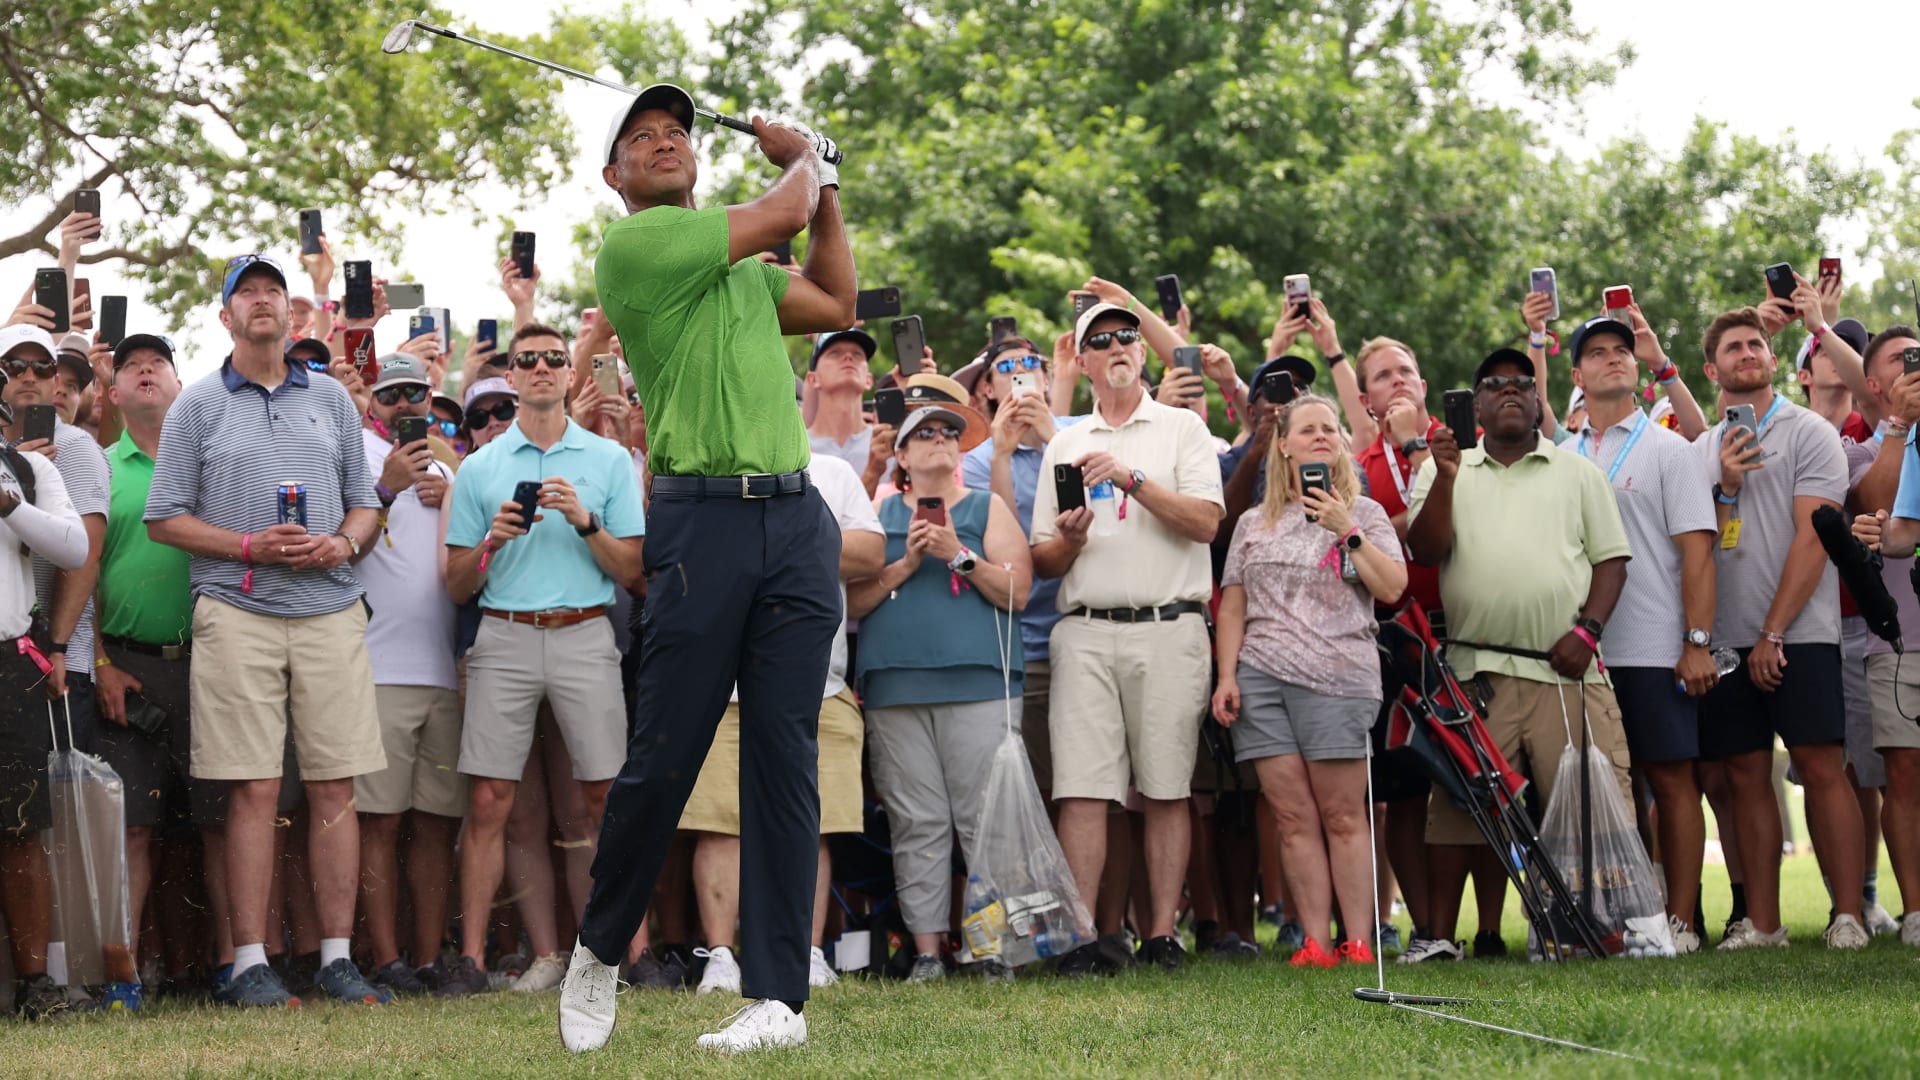 Tiger Woods on the first hole during the second round of the 2022 PGA Championship on May 20, 2022 in Tulsa, Oklahoma.